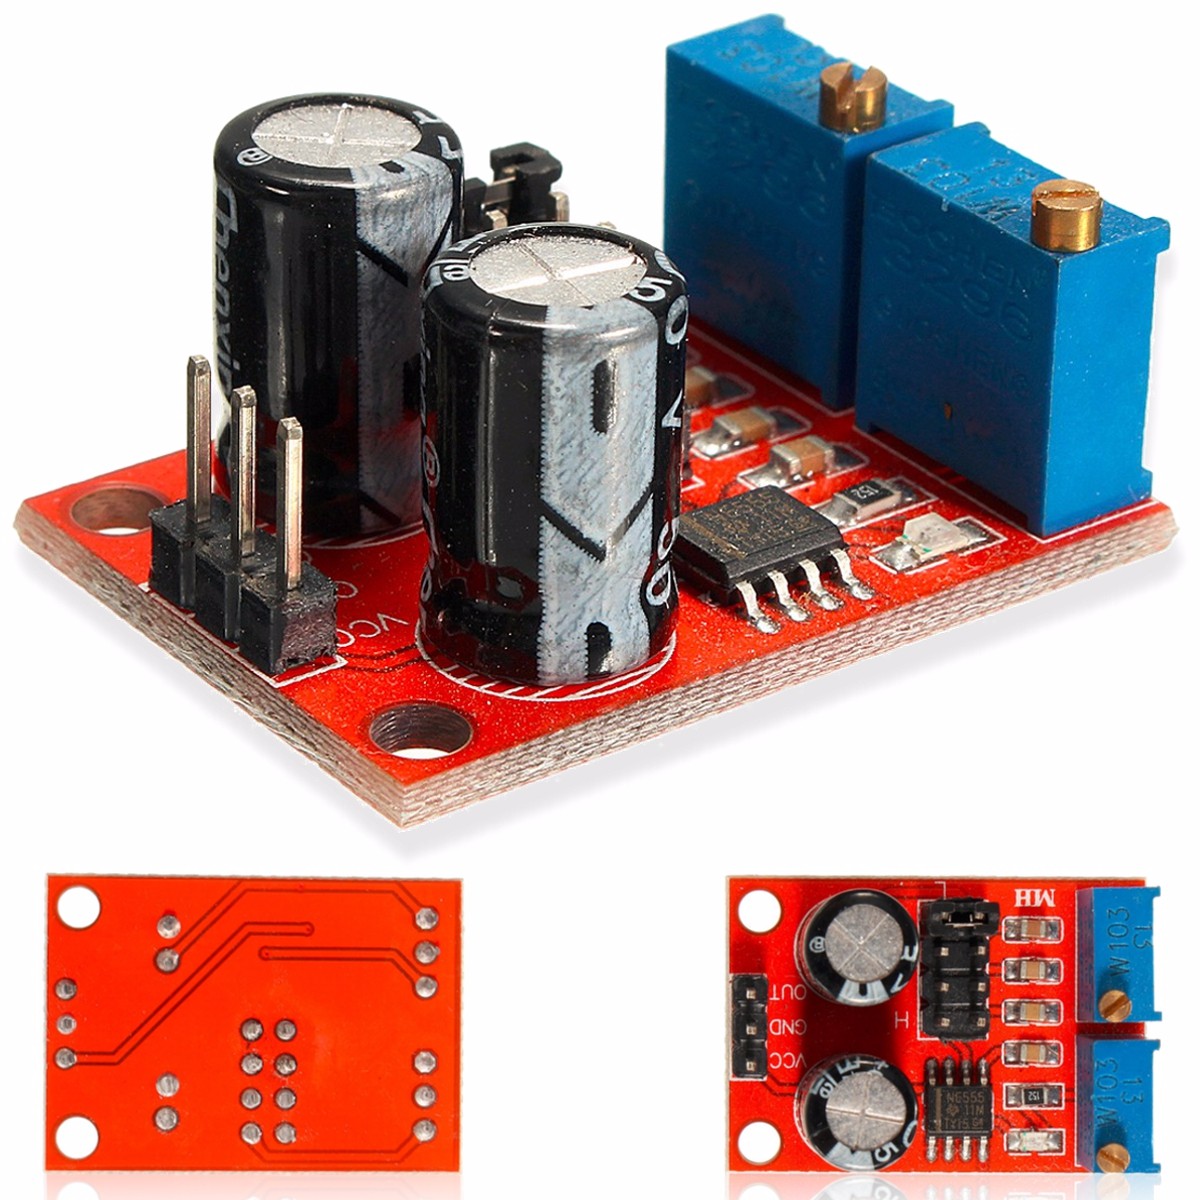 5pcs-NE555-Pulse-Frequency-Duty-Cycle-Adjustable-Module-Square-Wave-Signal-Generator-Stepper-Motor-D-1167078